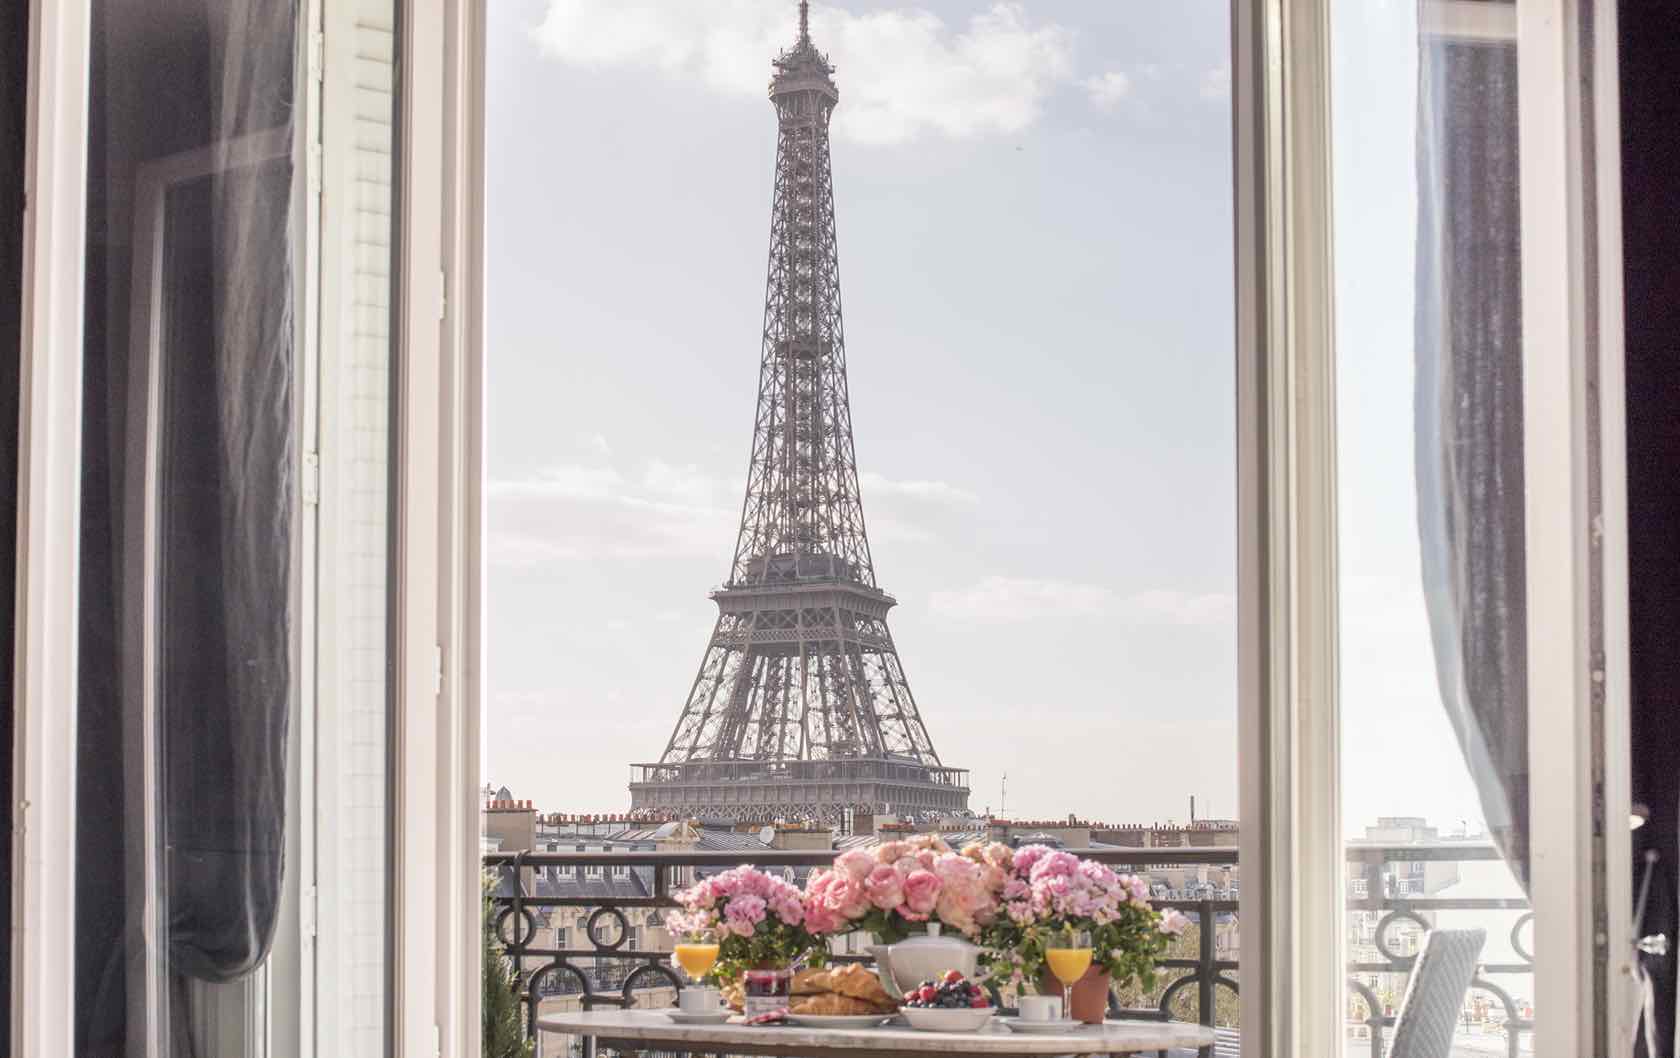 Gourmet teas a reminder of Paris at home - Luxury Travel Review